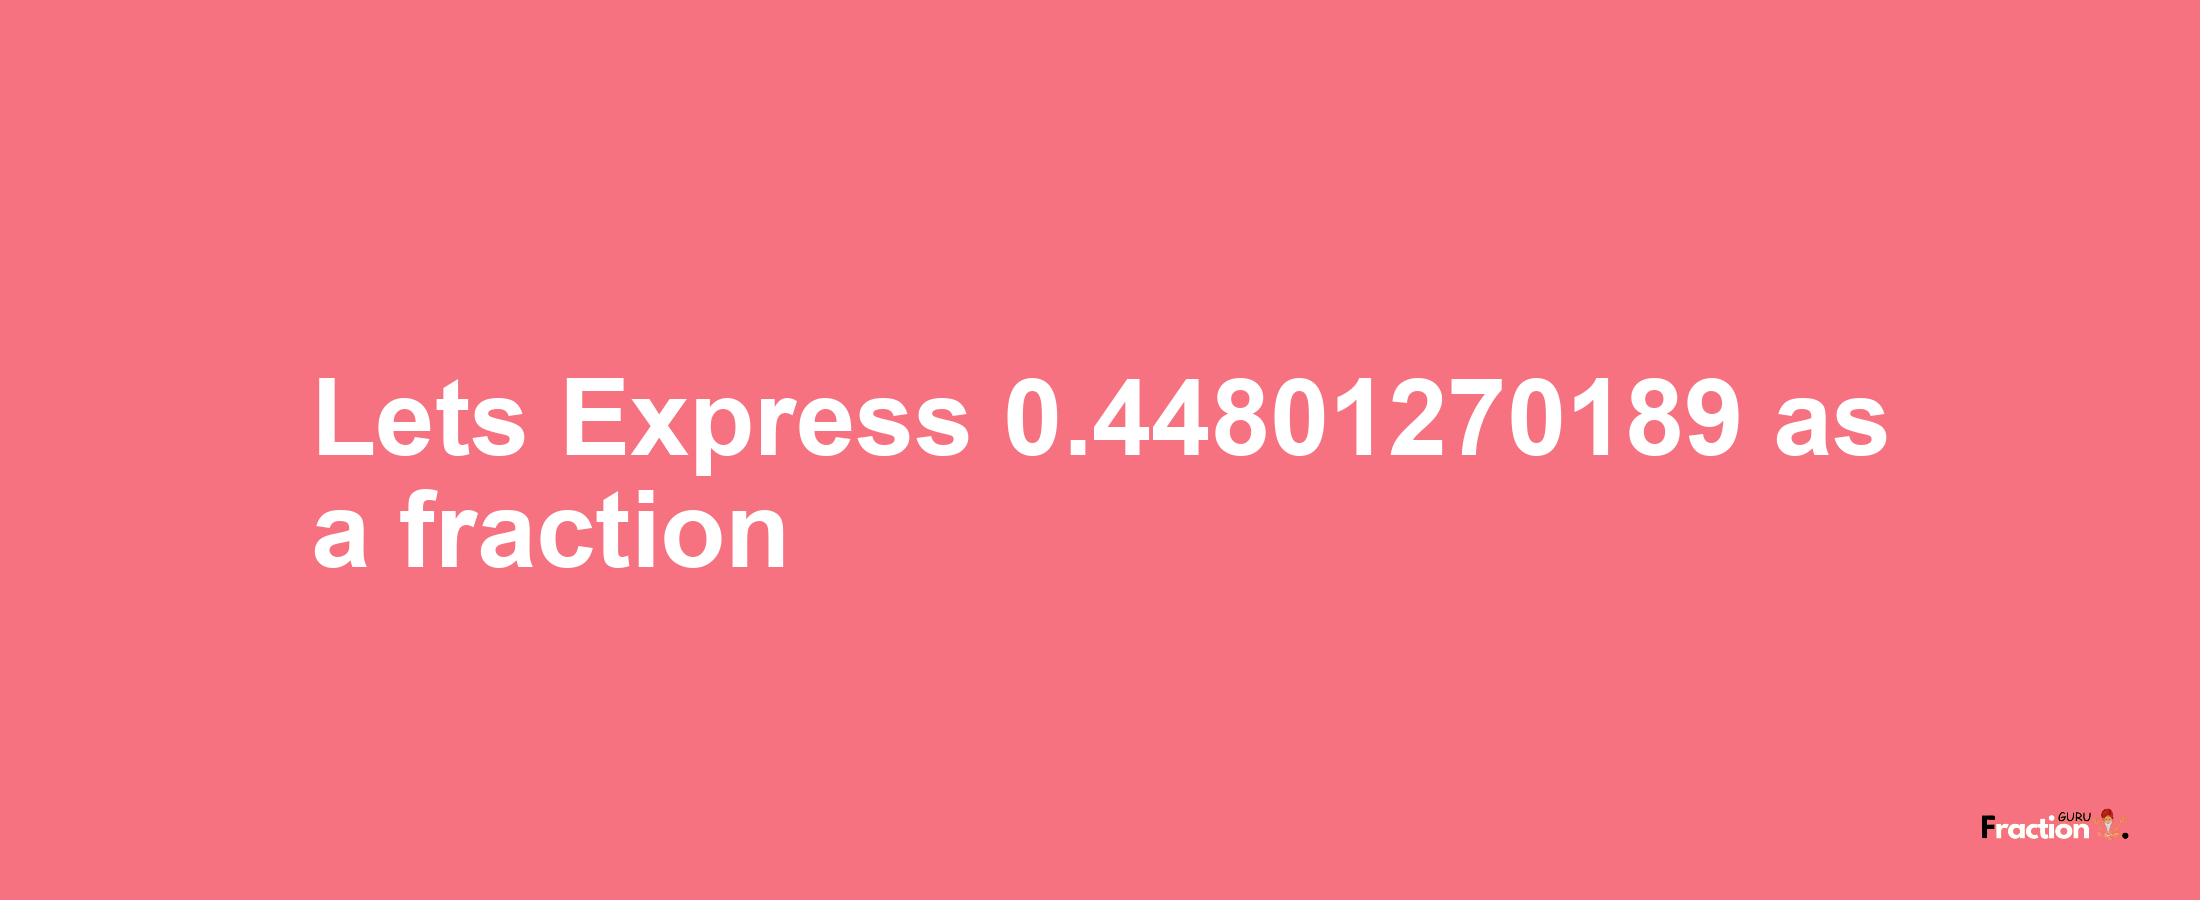 Lets Express 0.44801270189 as afraction